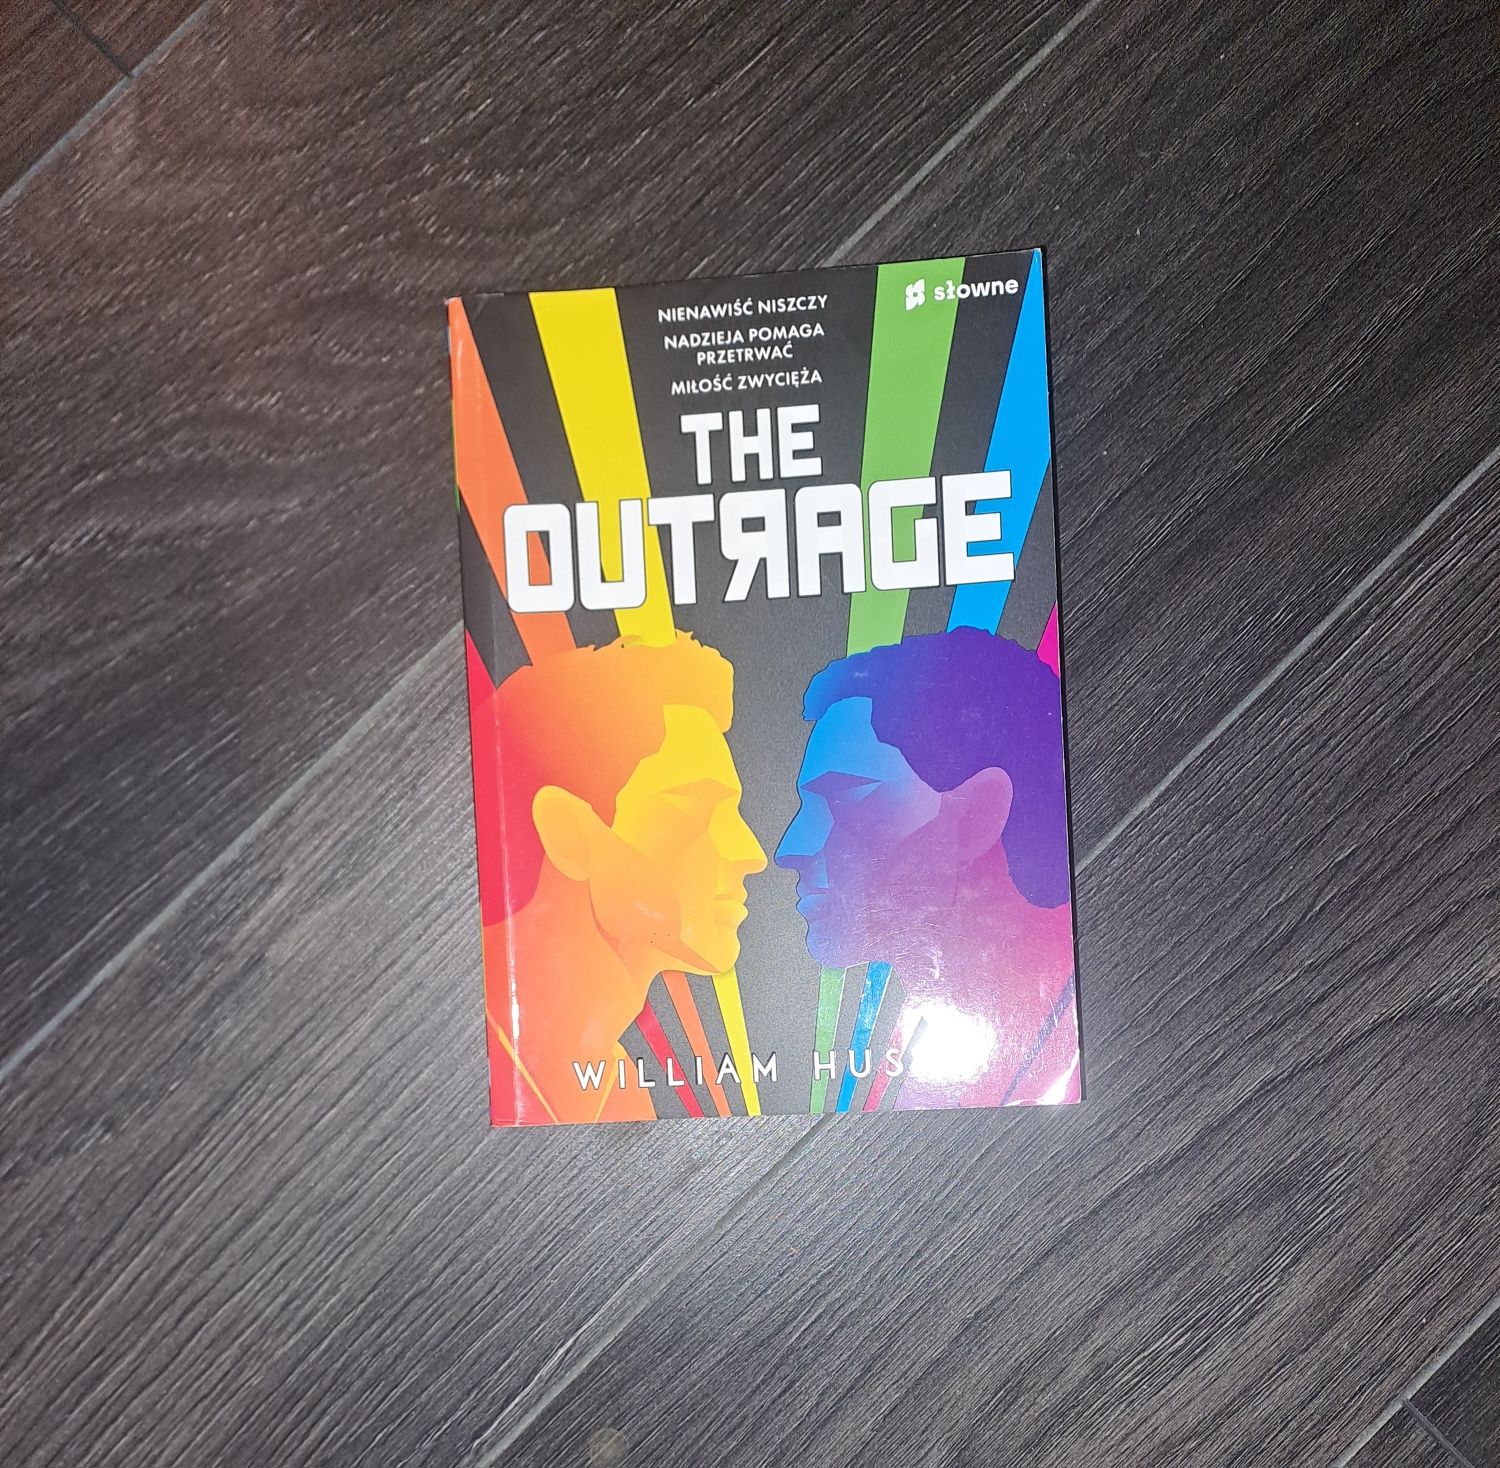 William Hussey The outrage